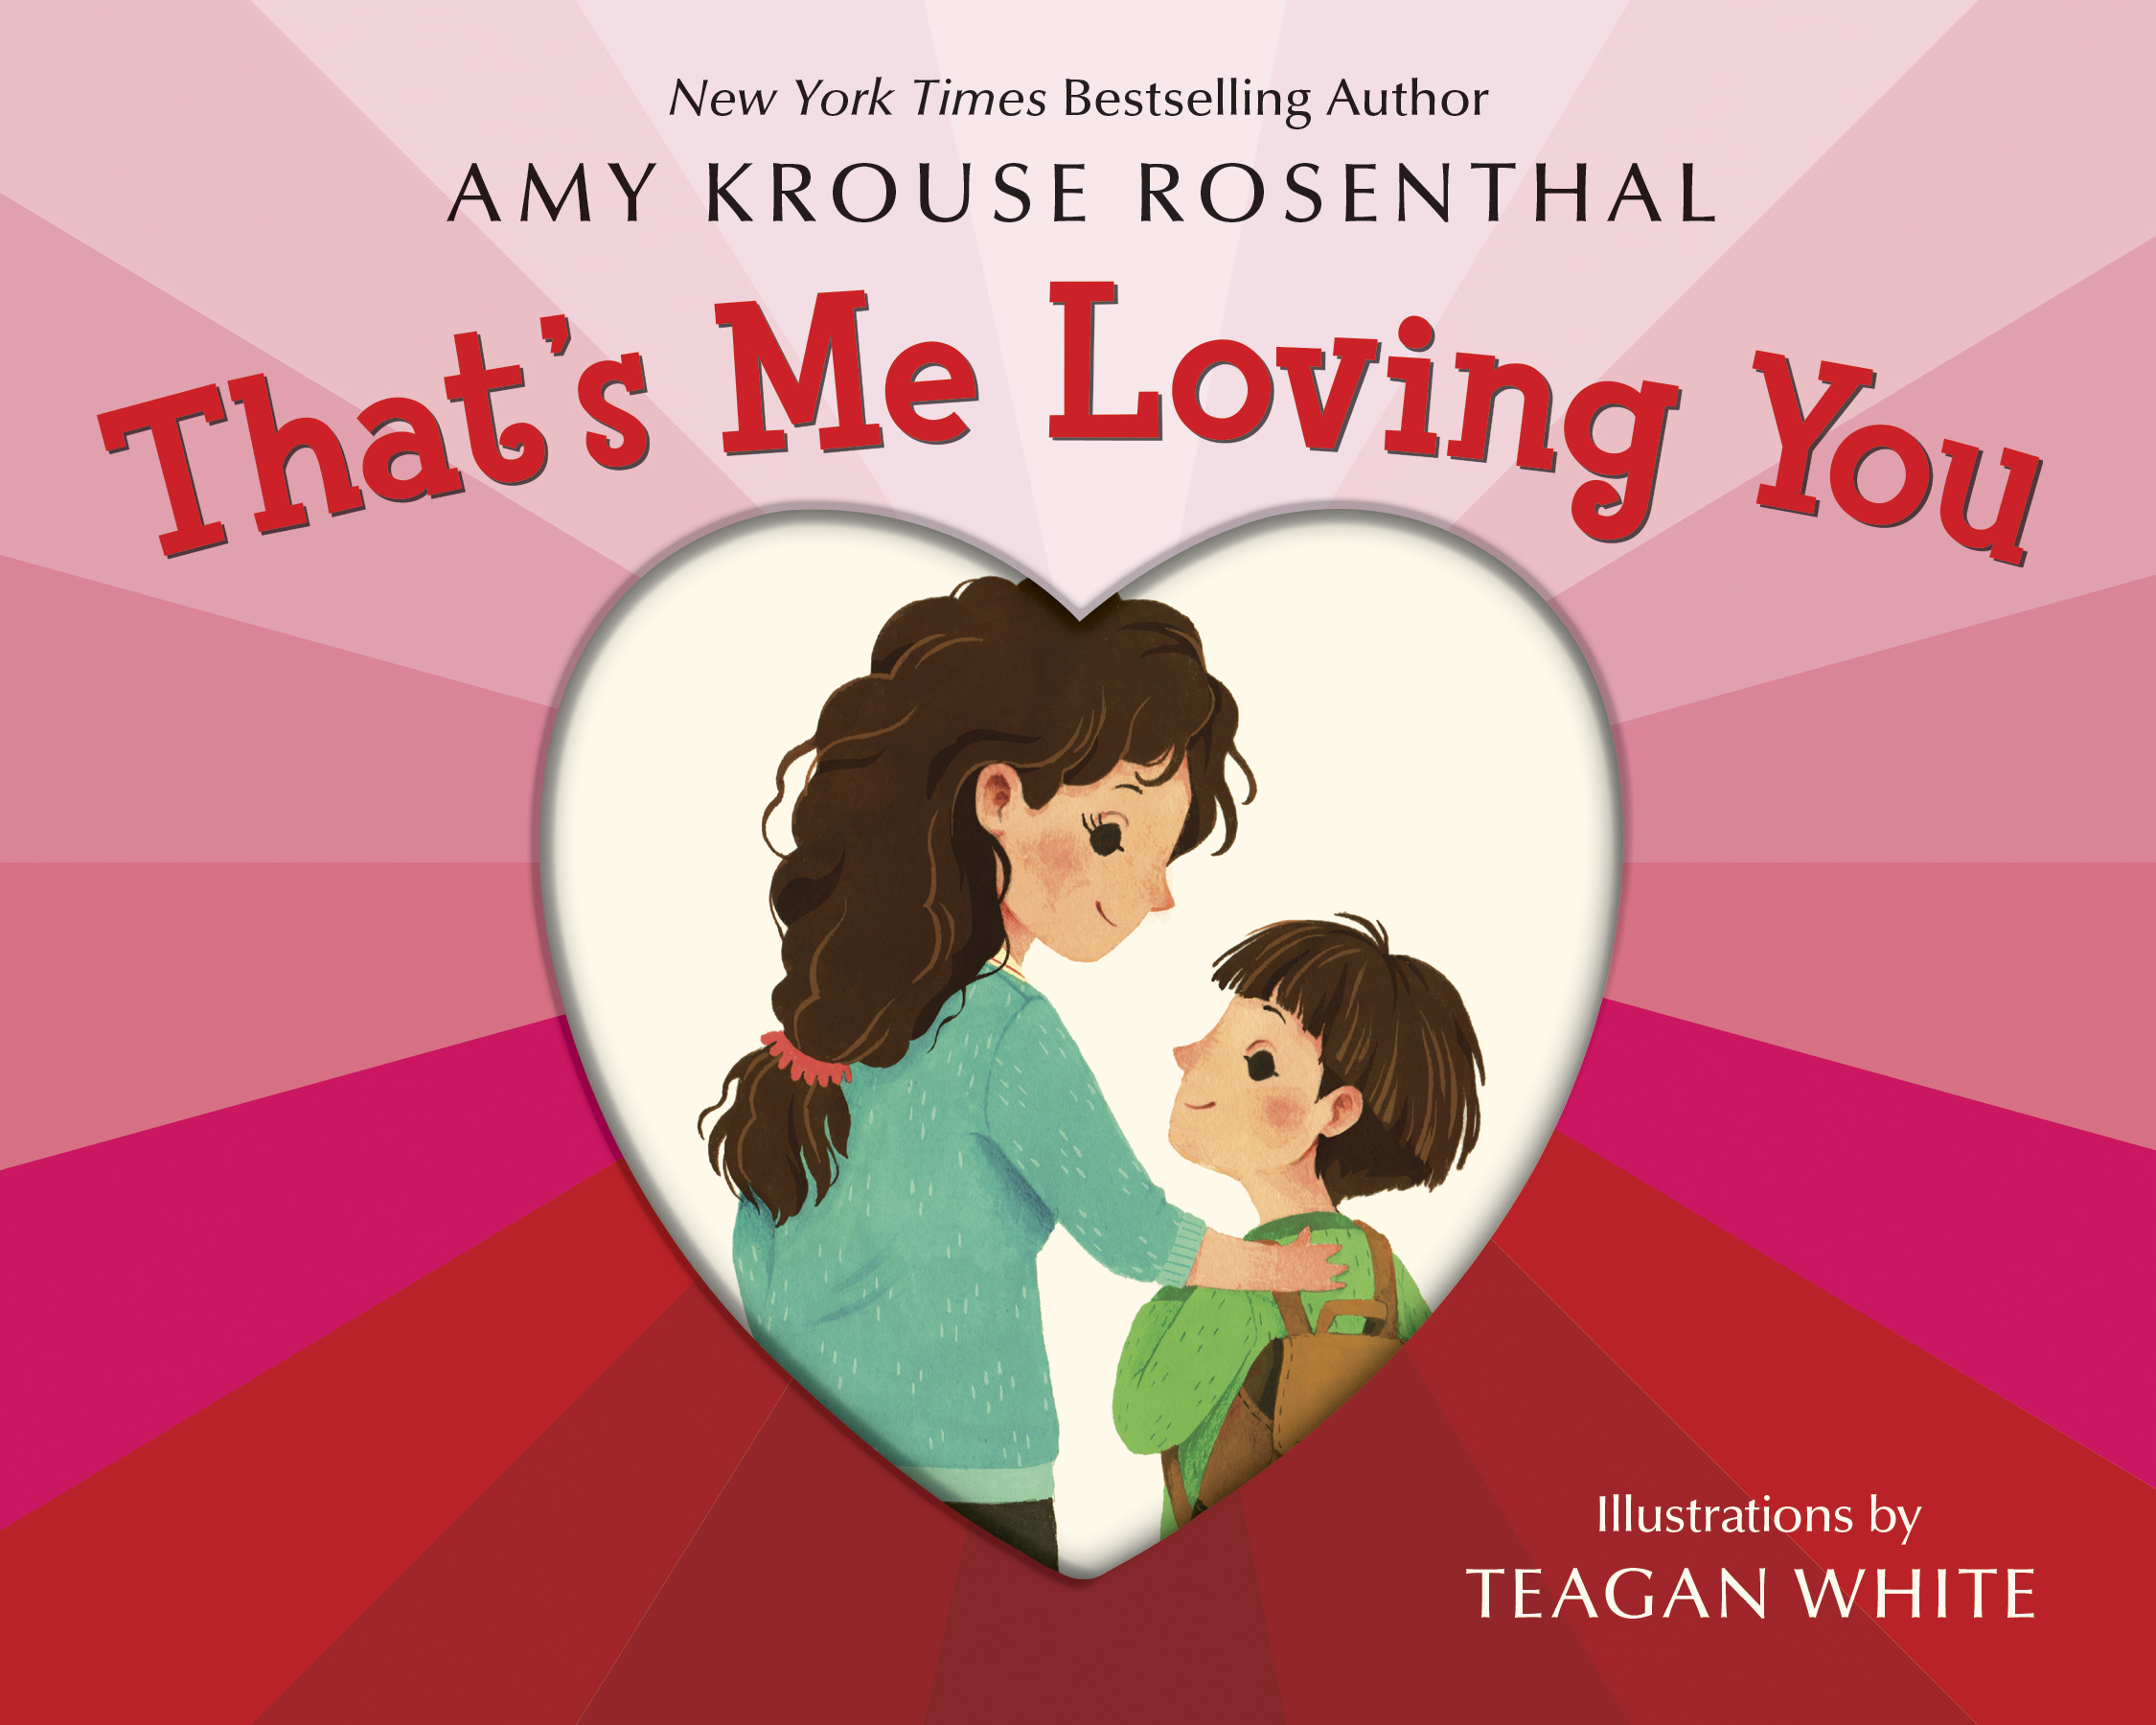 That's Me Loving You | Rosenthal, Amy Krouse